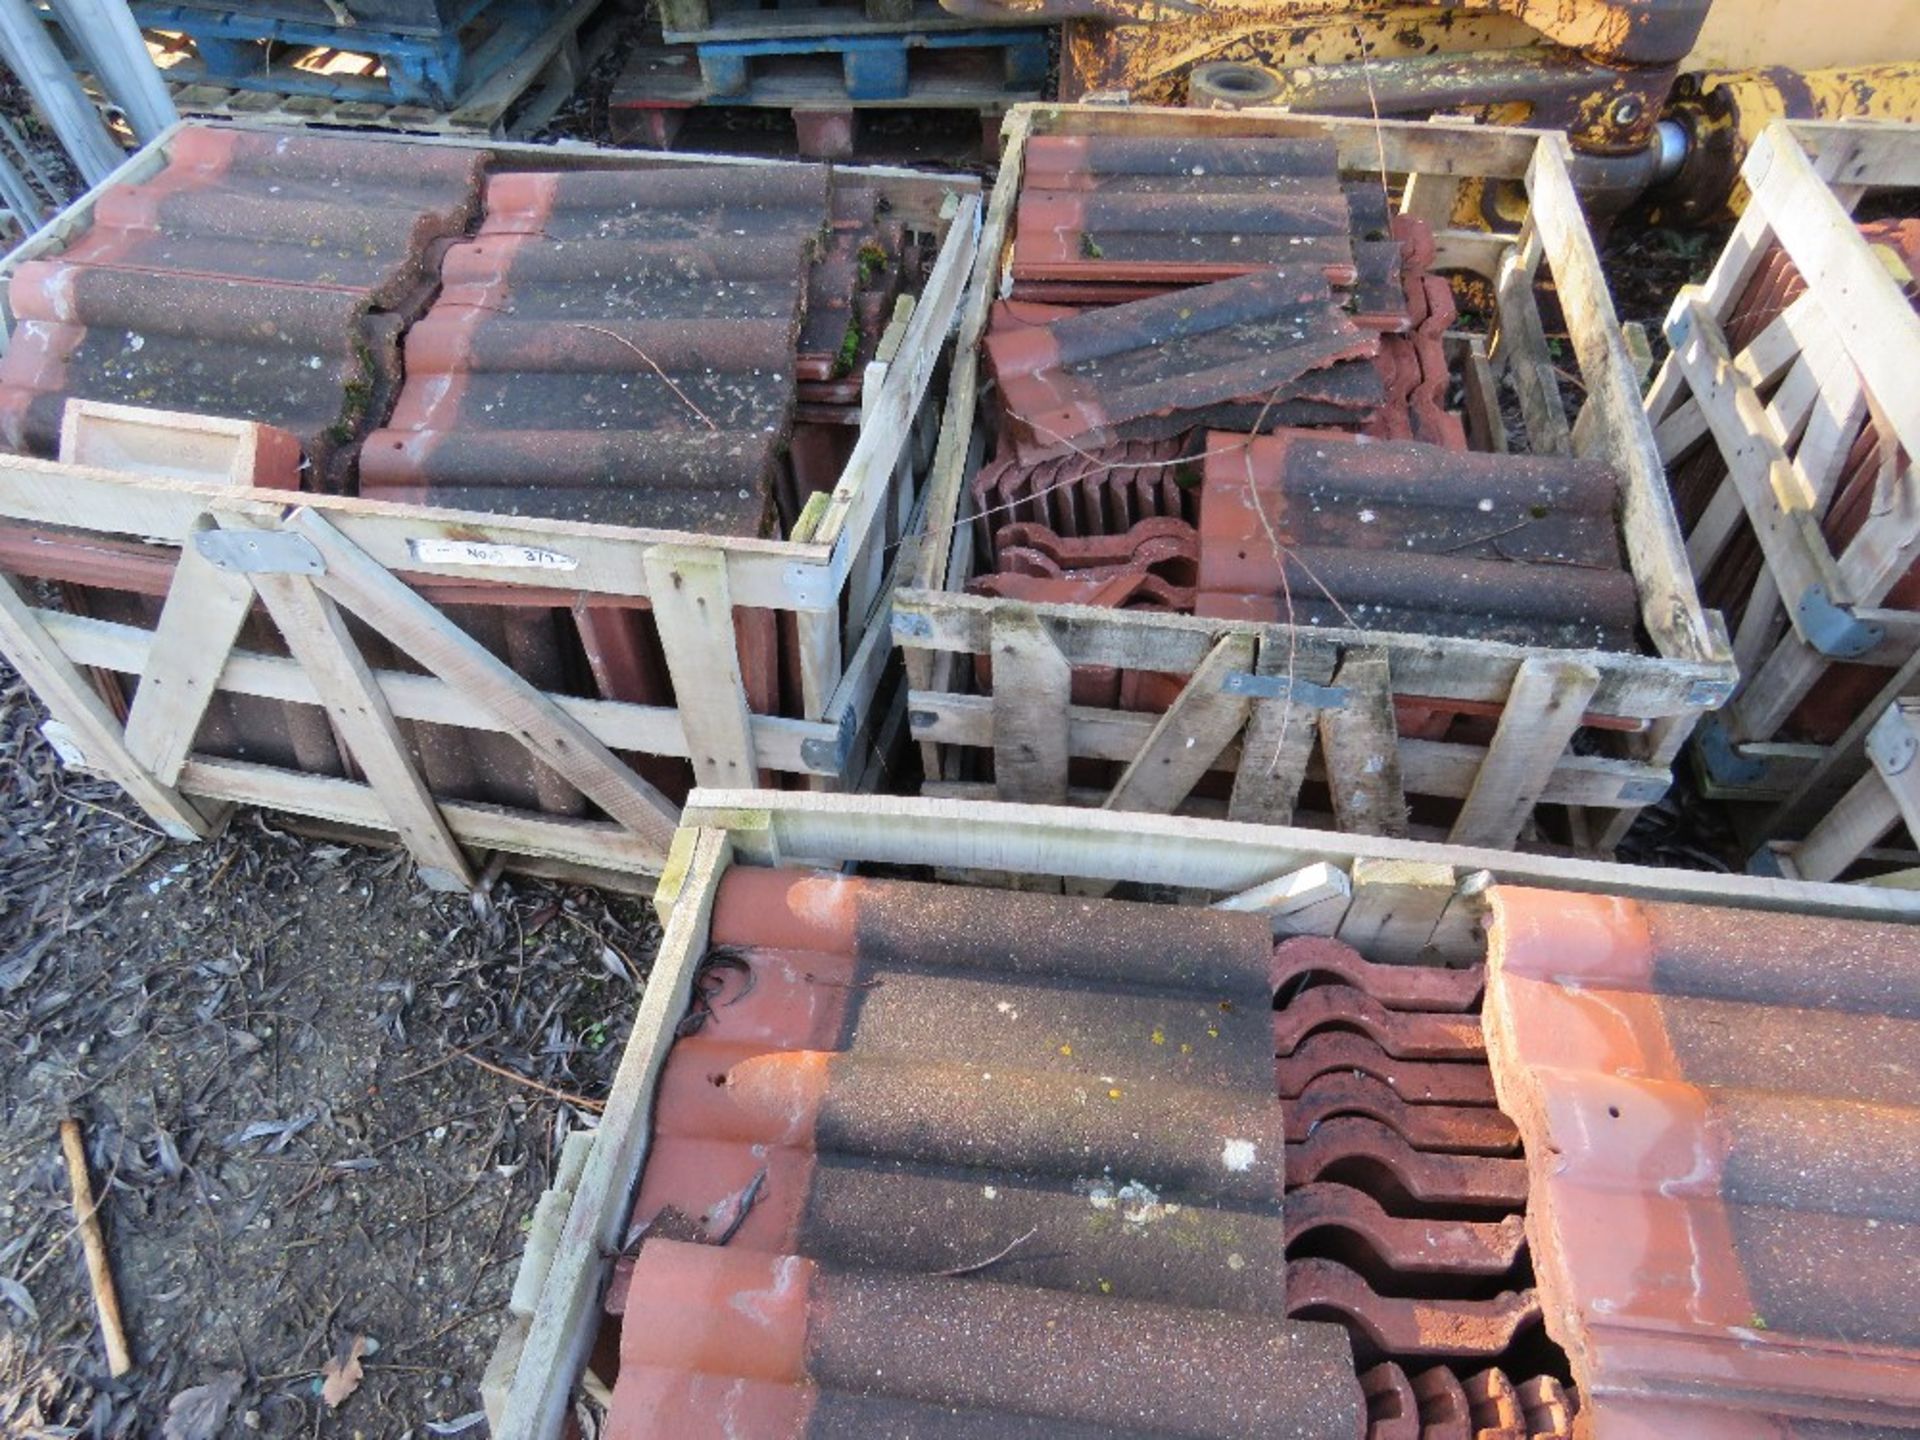 6 X STILLAGES OF REDLAND CONCRETE ROOF TILES, PRE USED. RECENTLY REMOVED FROM HOUSE BEING DEMOLISHED - Image 4 of 5